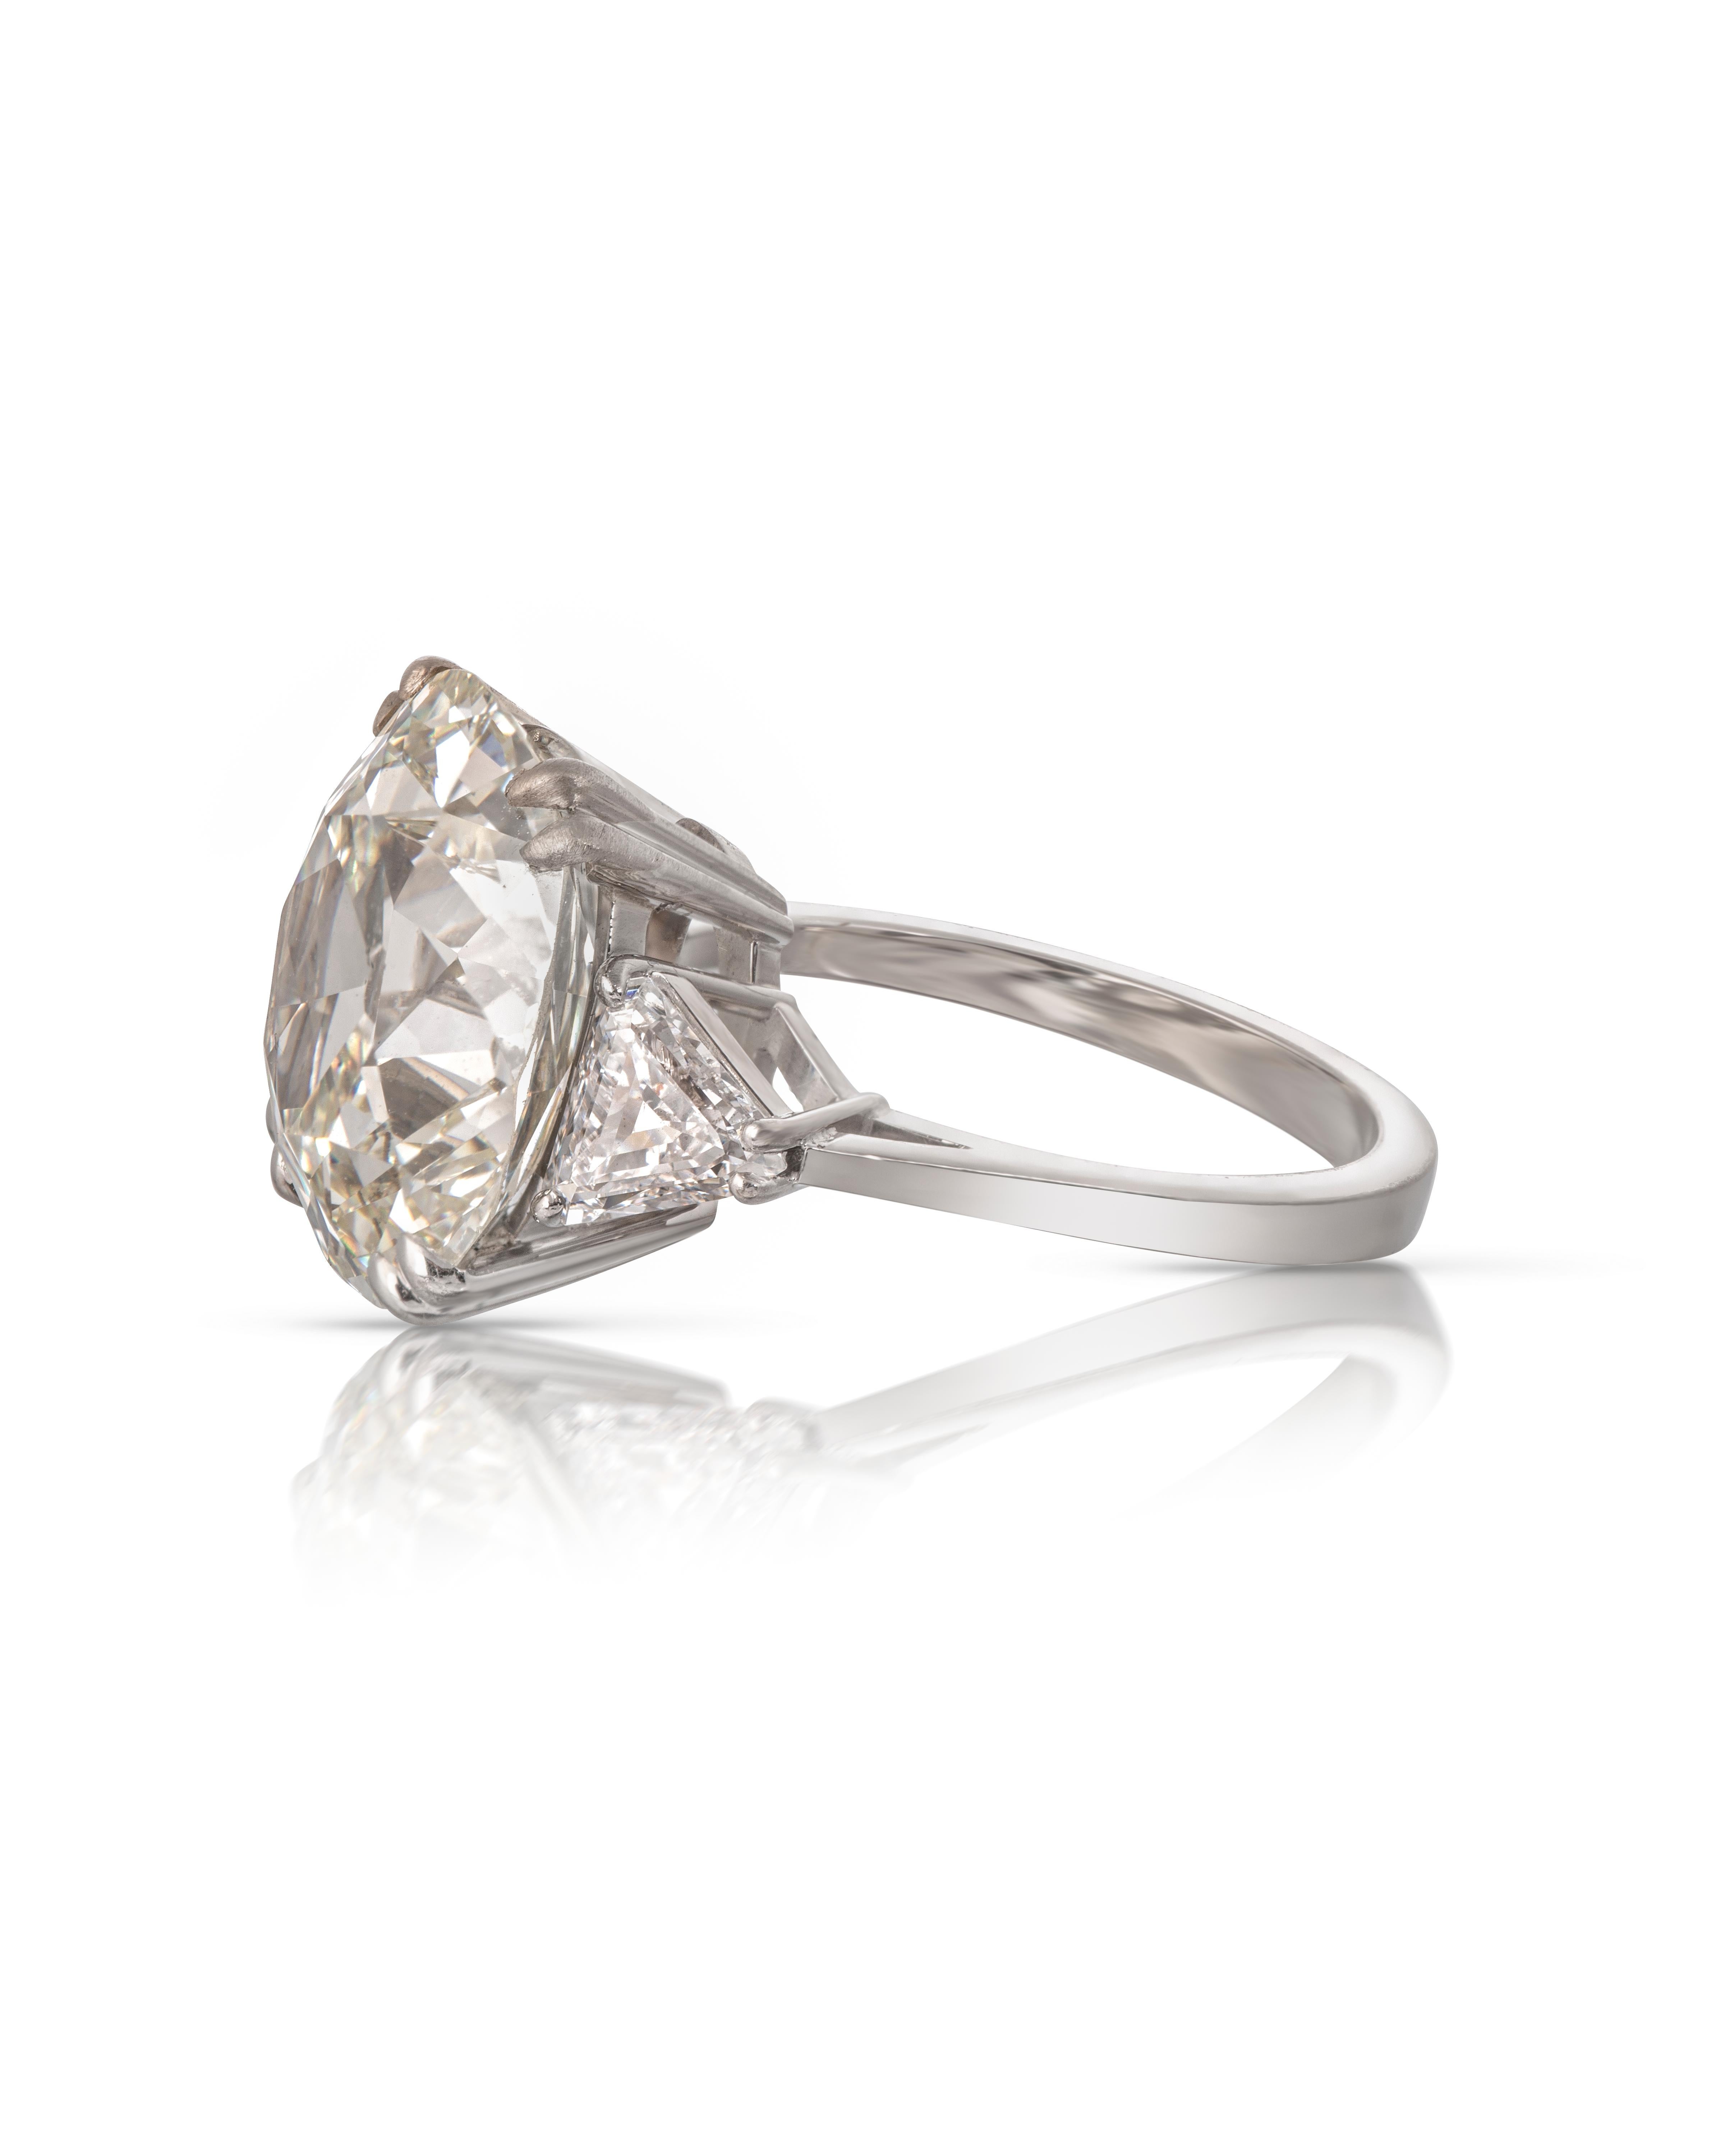 GIA Certified 10.45 carat Cushion Cut Diamond Ring
This gorgeous and unique antique cushion brilliant cut diamond of 10.45 carats is L colour and Si1 clarity as graded by the GIA. The main stone is set in a hand made platinum setting with a